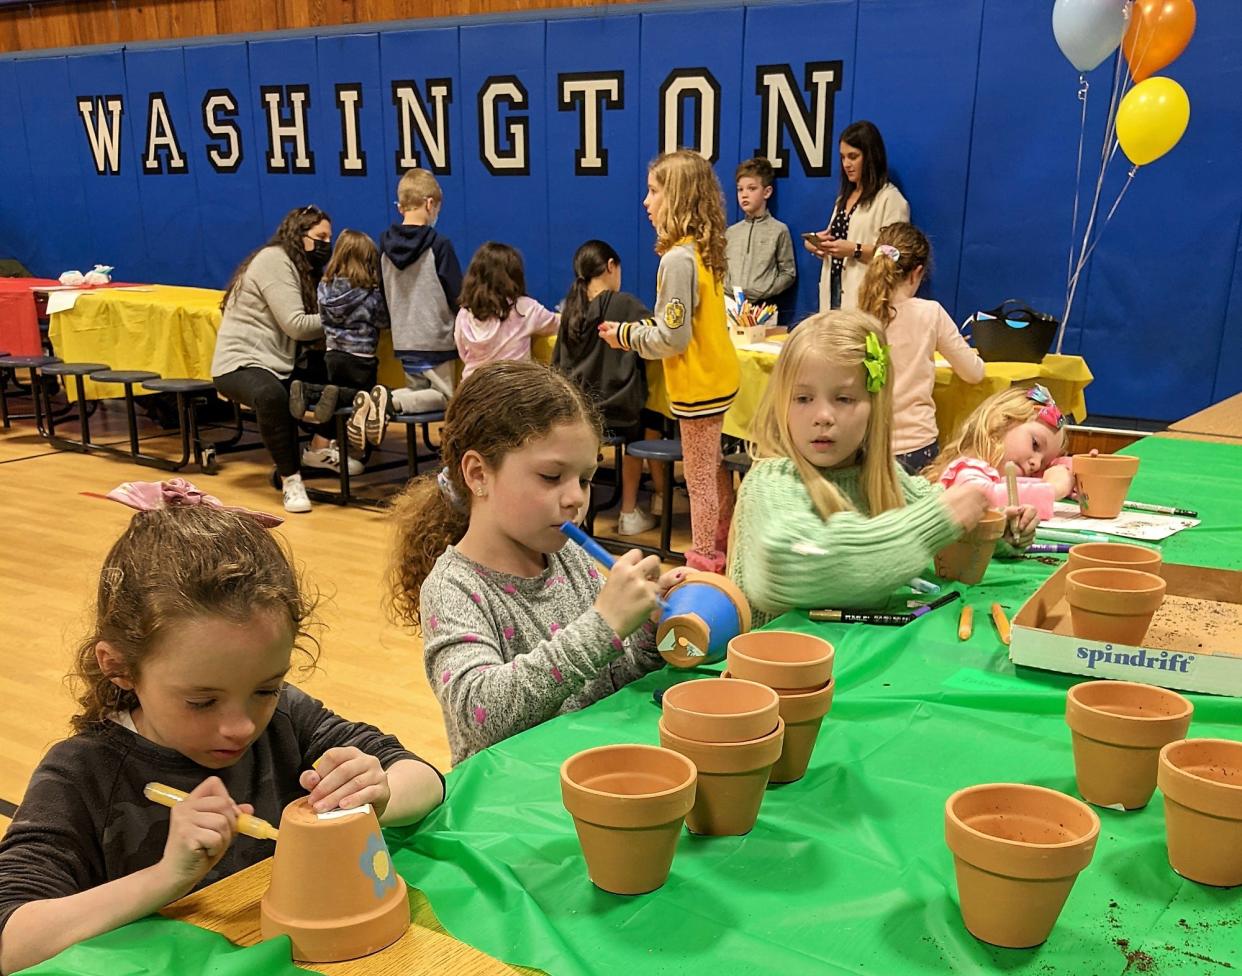 Washington Elementary School students decorated and potted plants for local senior citizens as part of Community Service Night on Thursday, March 24.